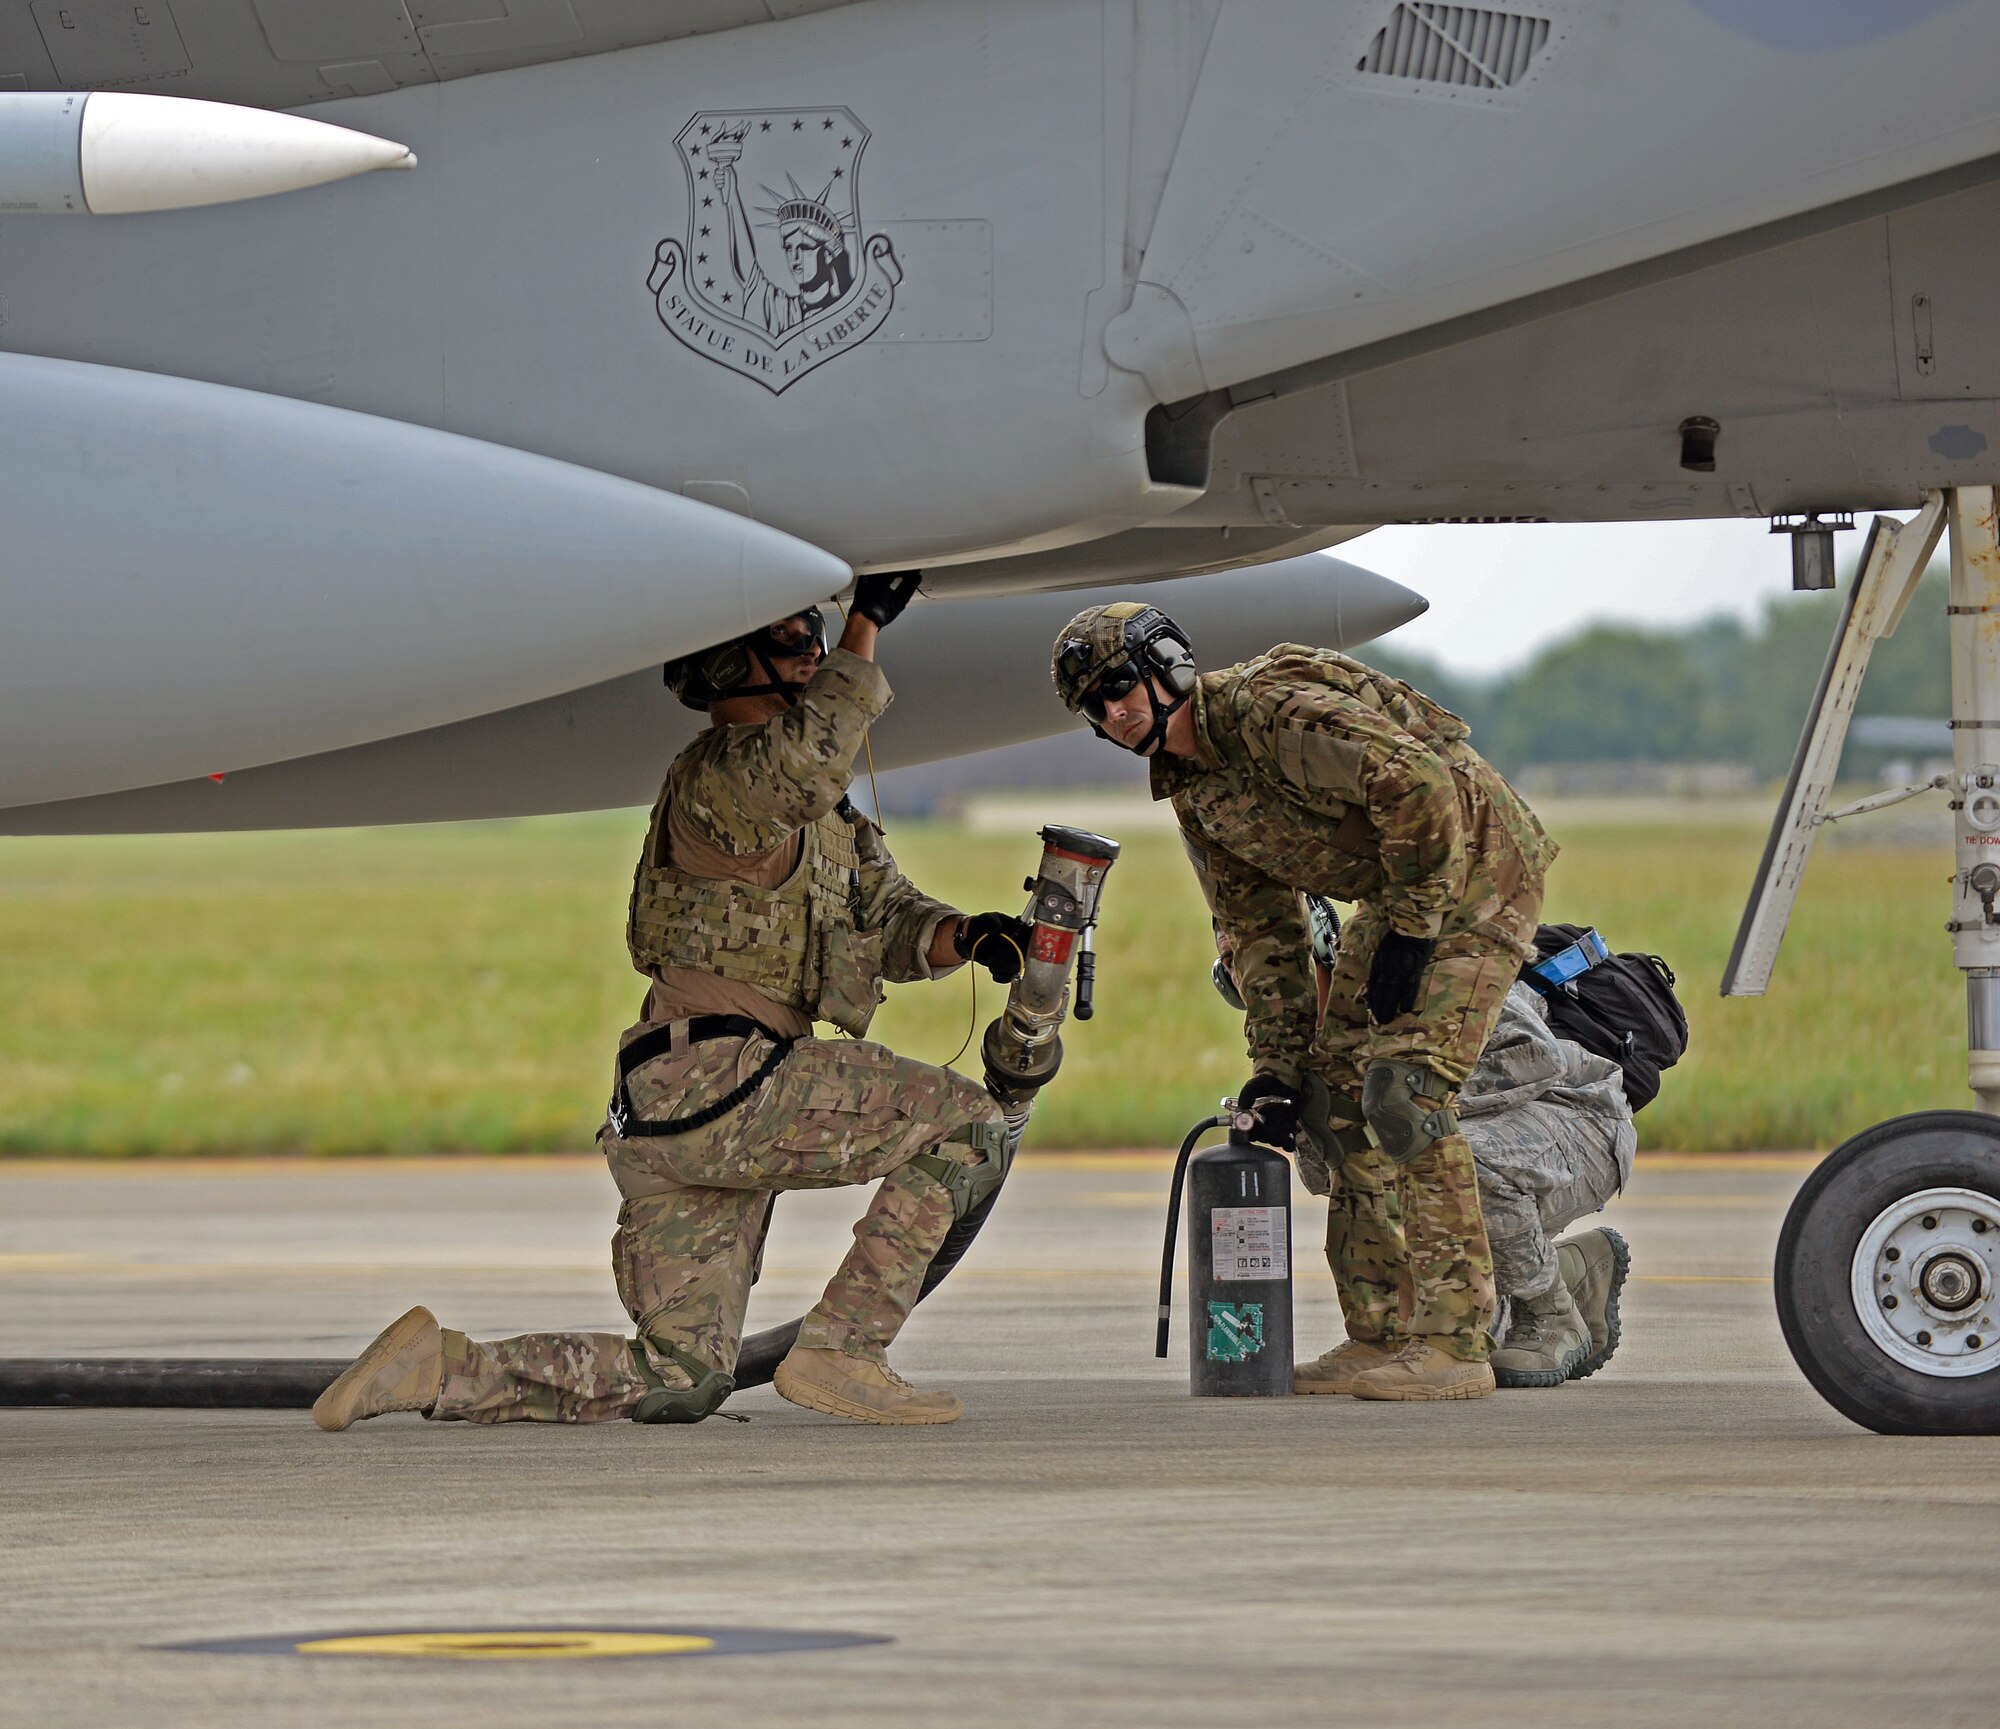 U.S. Air Force Airman 1st Class Michael Ricci, 100th Logistics Readiness Squadron Forward Arming and Refueling Point, or FARP, technician begins to hook up a fuel hose to a F-15C Eagle from RAF Lakenheath as U.S. Air Force Staff Sgt. Brian Nichols, 100th LRS FARP technician stands nearby with a fire extinguisher during a FARP exercise July 26, 2017, on RAF Mildenhall, England. The FARP exercise brought together the 352d Special Operations Wing, 48th Fighter Wing and 100th Air Refueling Wing. (U.S. Air Force photo by Airman 1st Class Luke Milano)